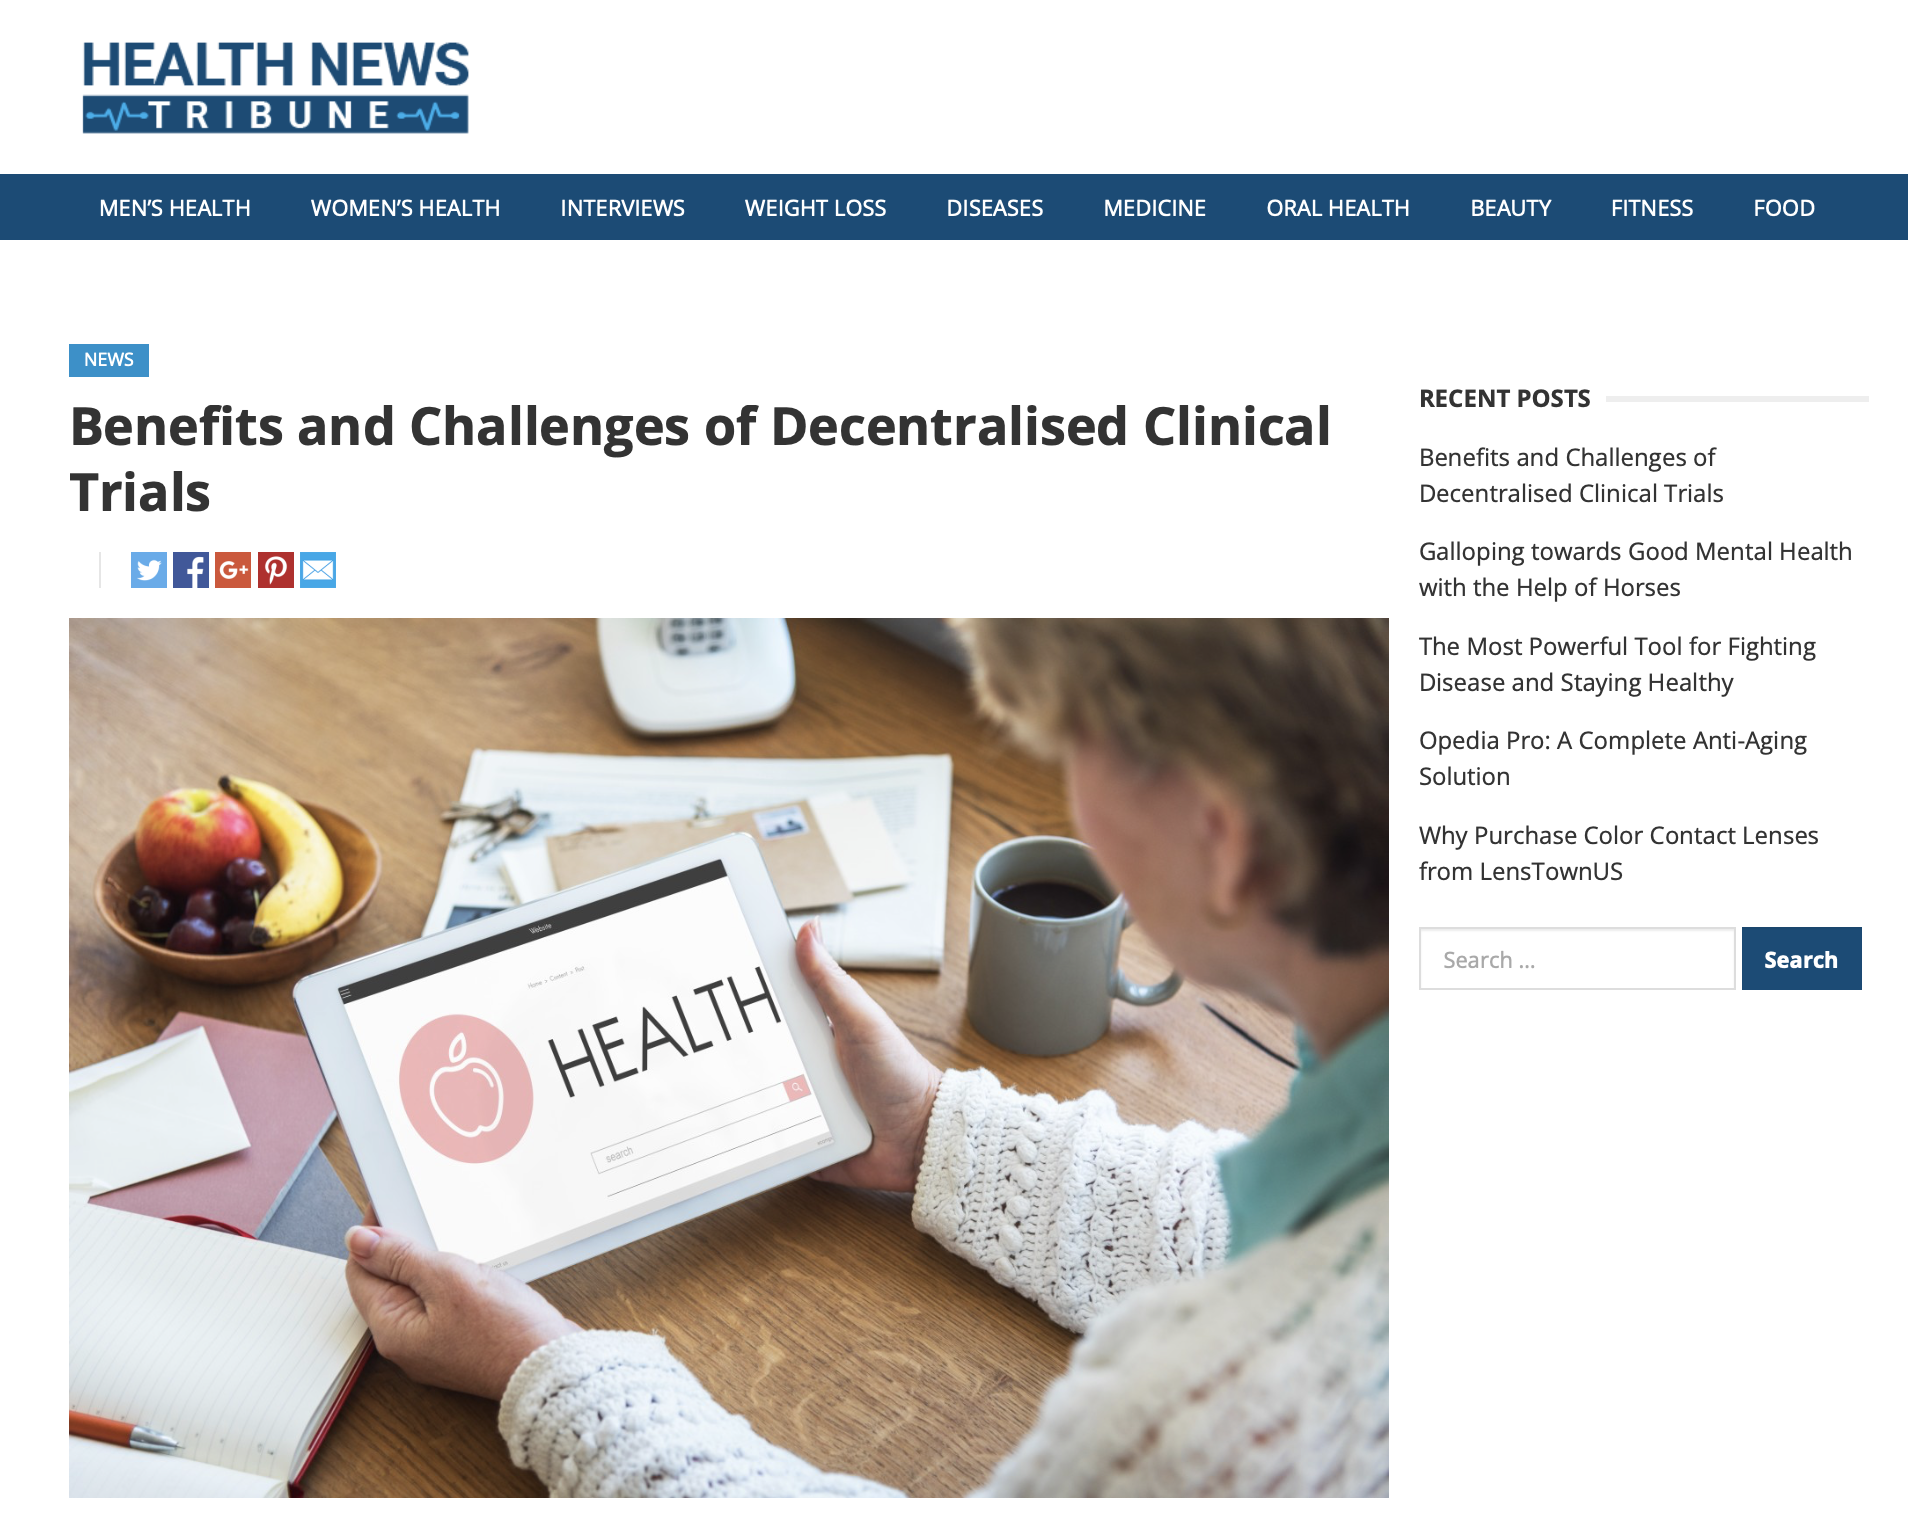 Featured on Health News Tribute: “Benefits and Challenges of Decentralised Clinical Trials”